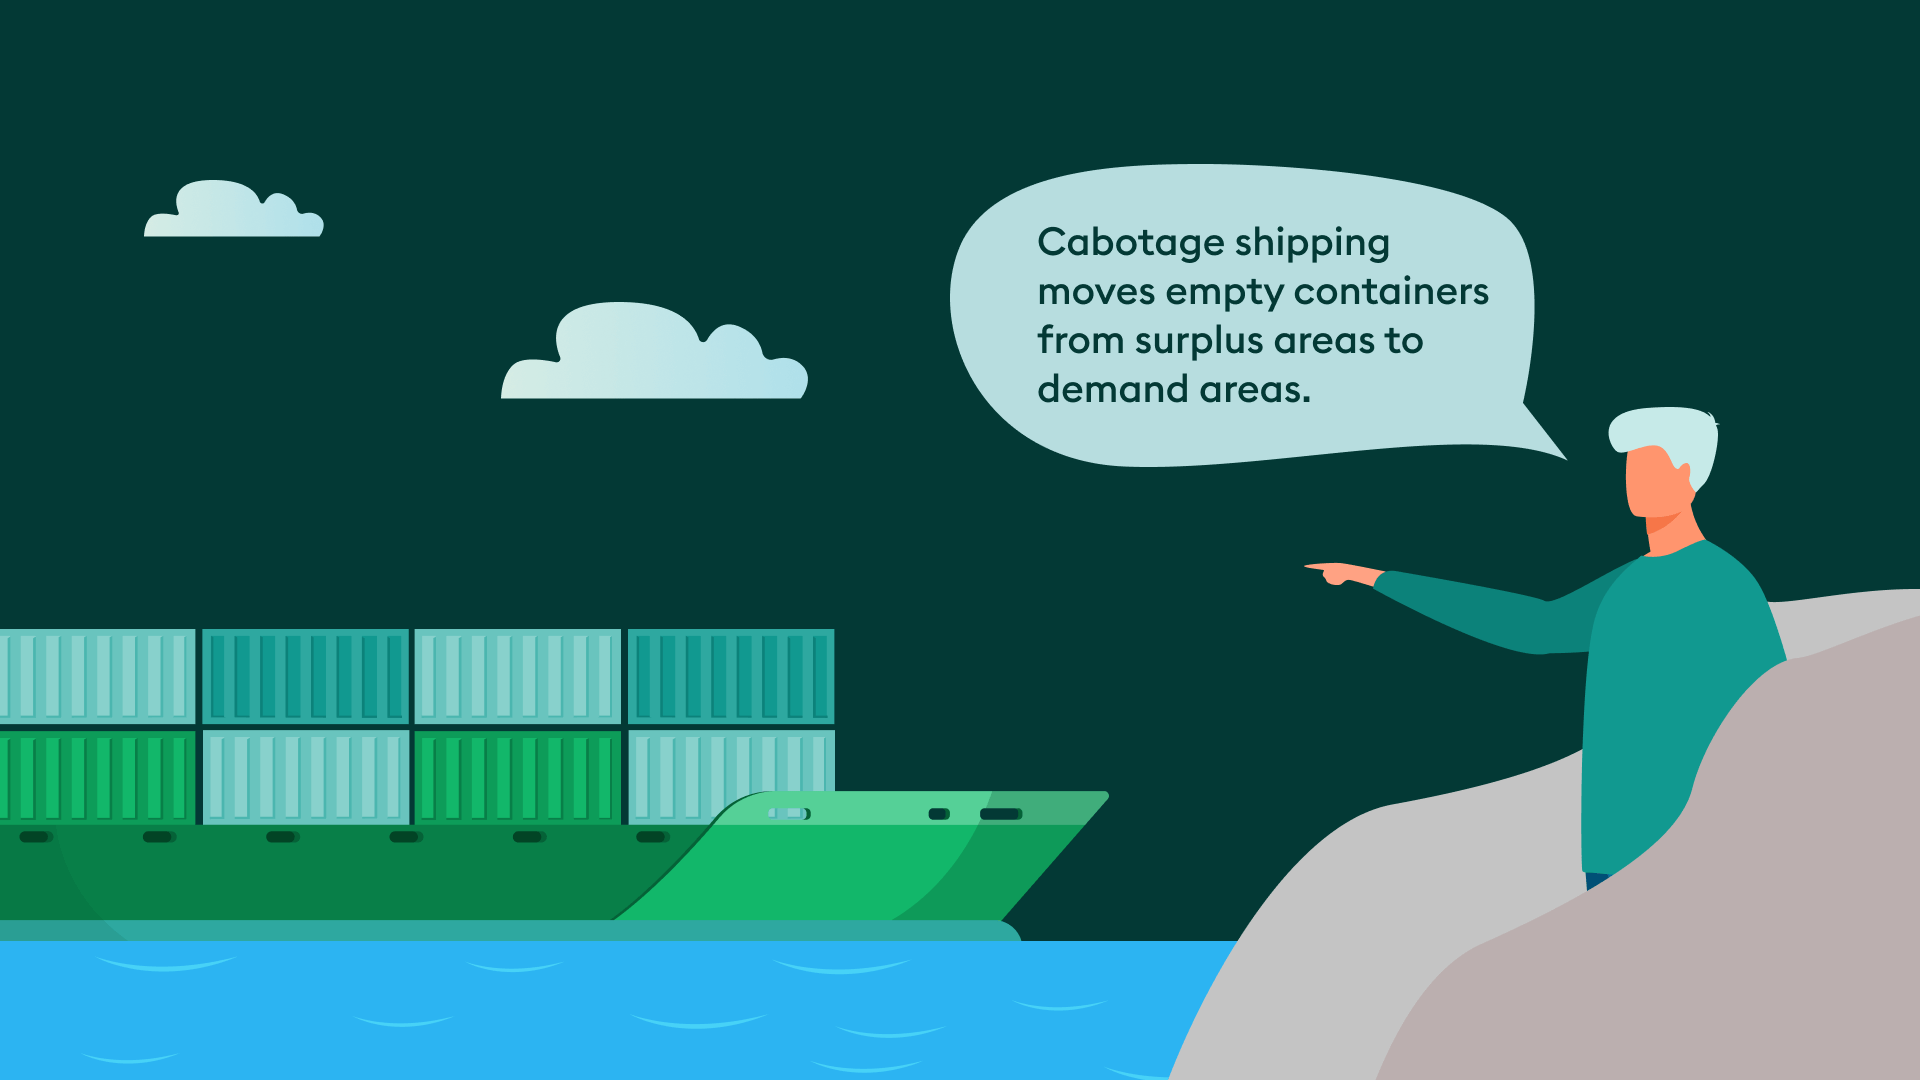 what is a cabotage container?